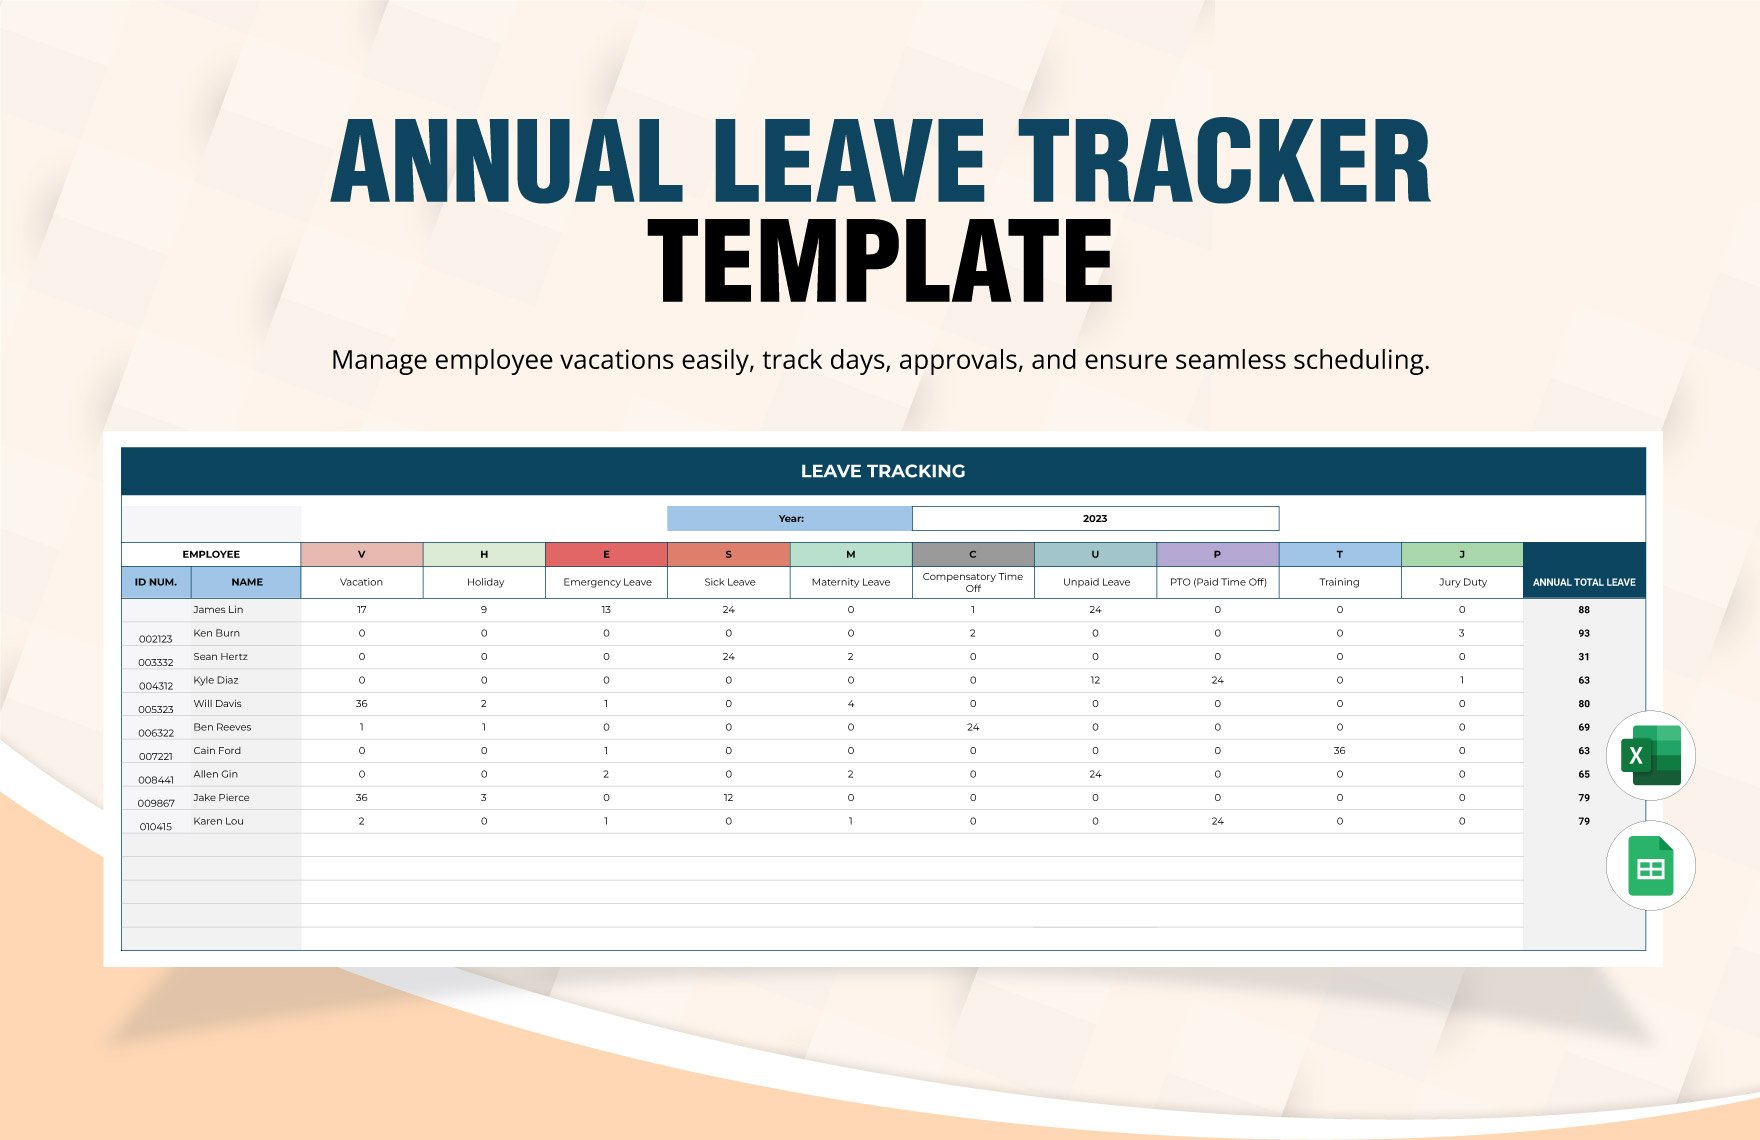 Annual Leave Tracker Template in Excel, Google Sheets